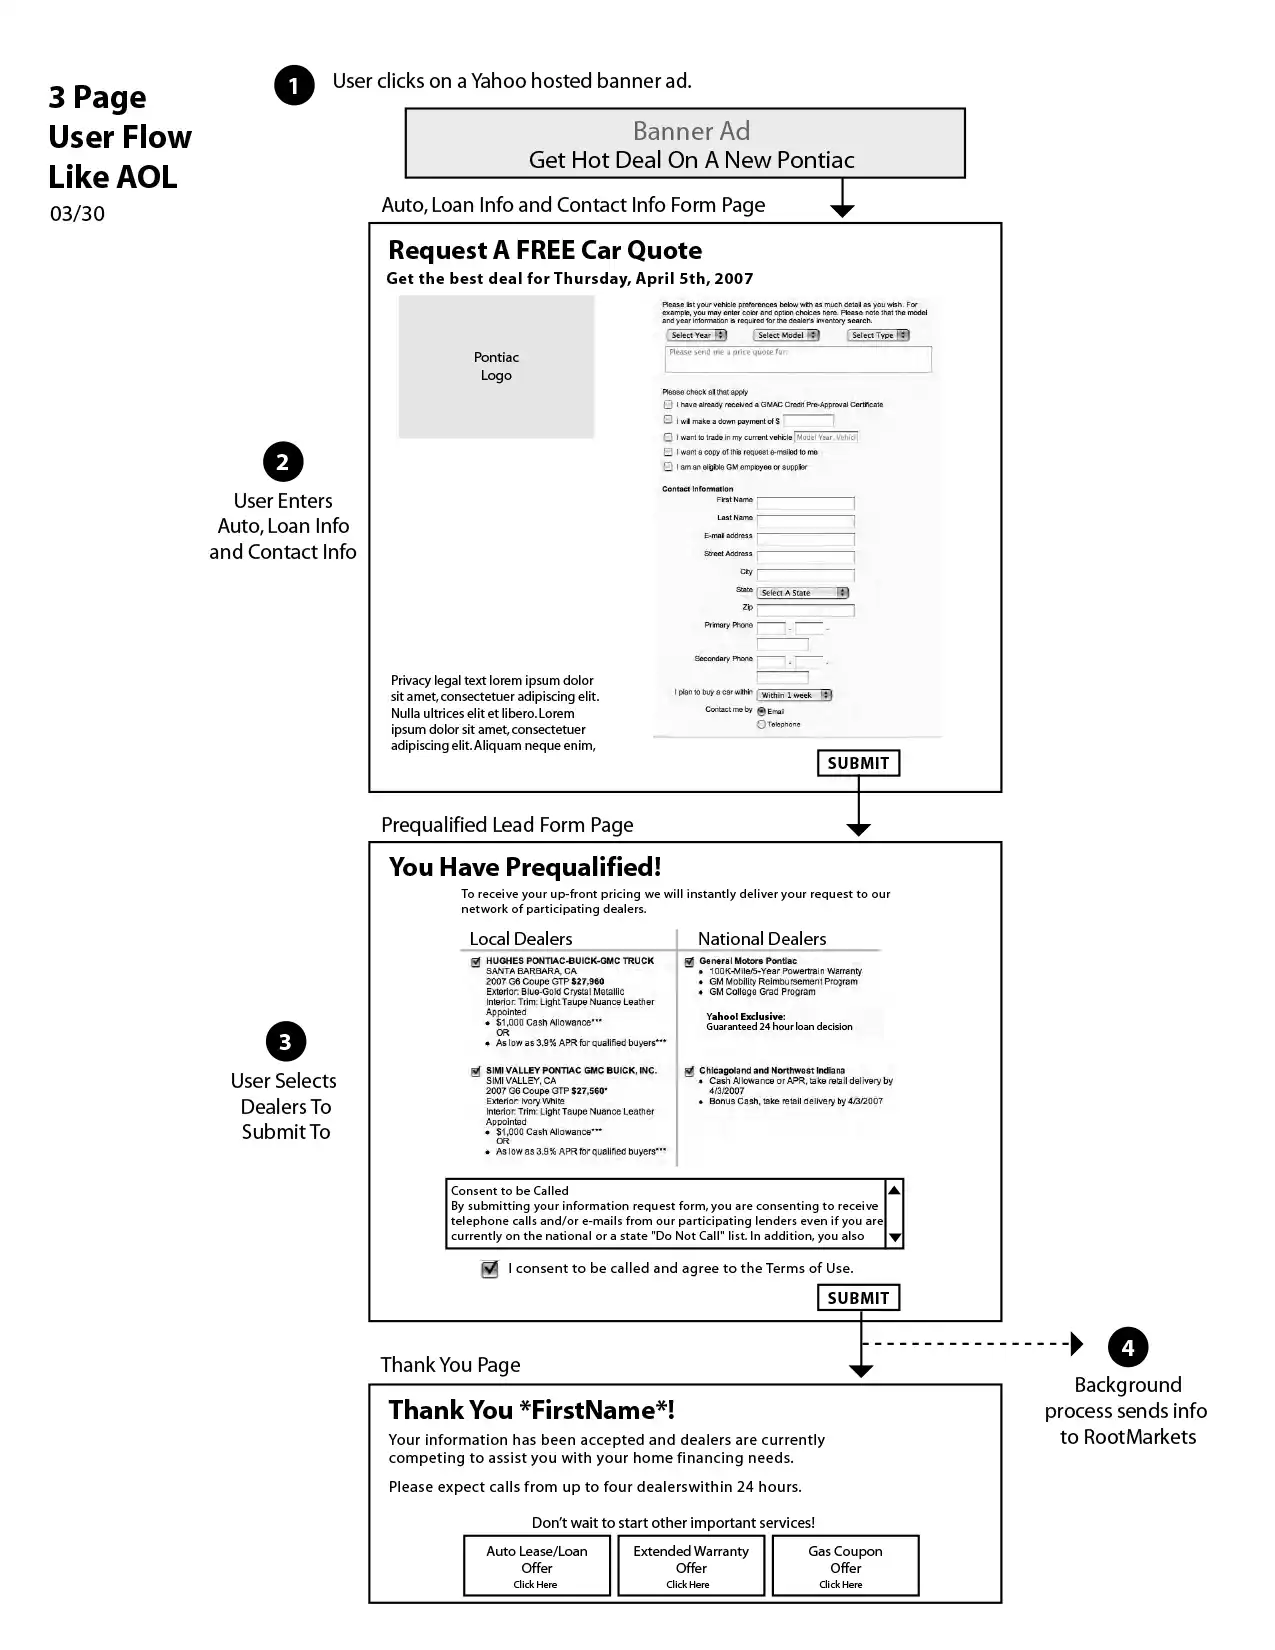 wireframe user flow image showing three-step process